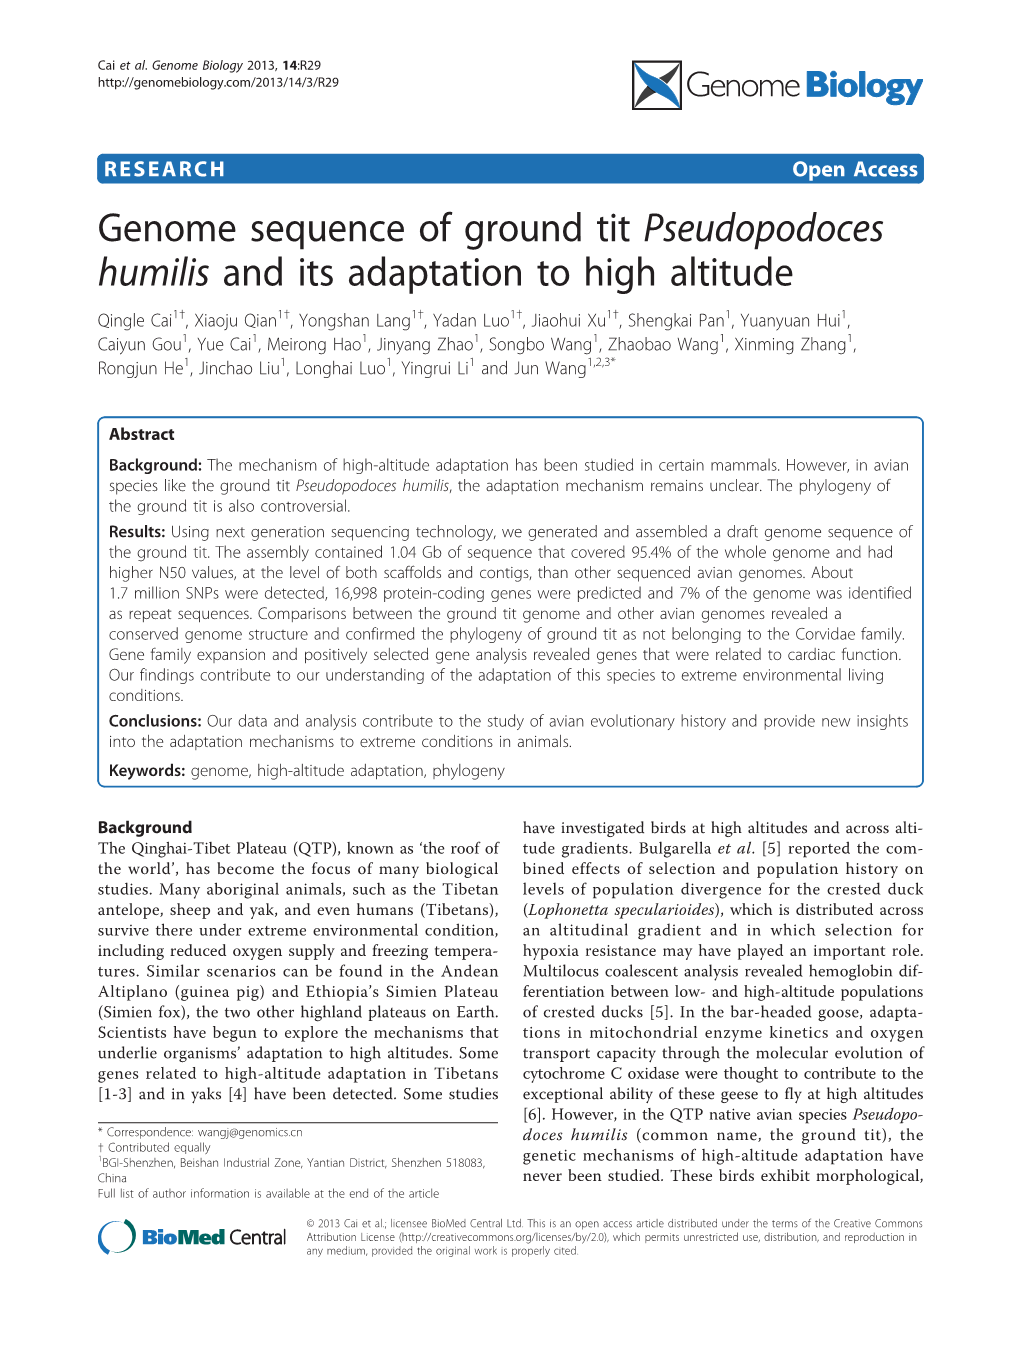 Genome Sequence of Ground Tit Pseudopodoces Humilis and Its